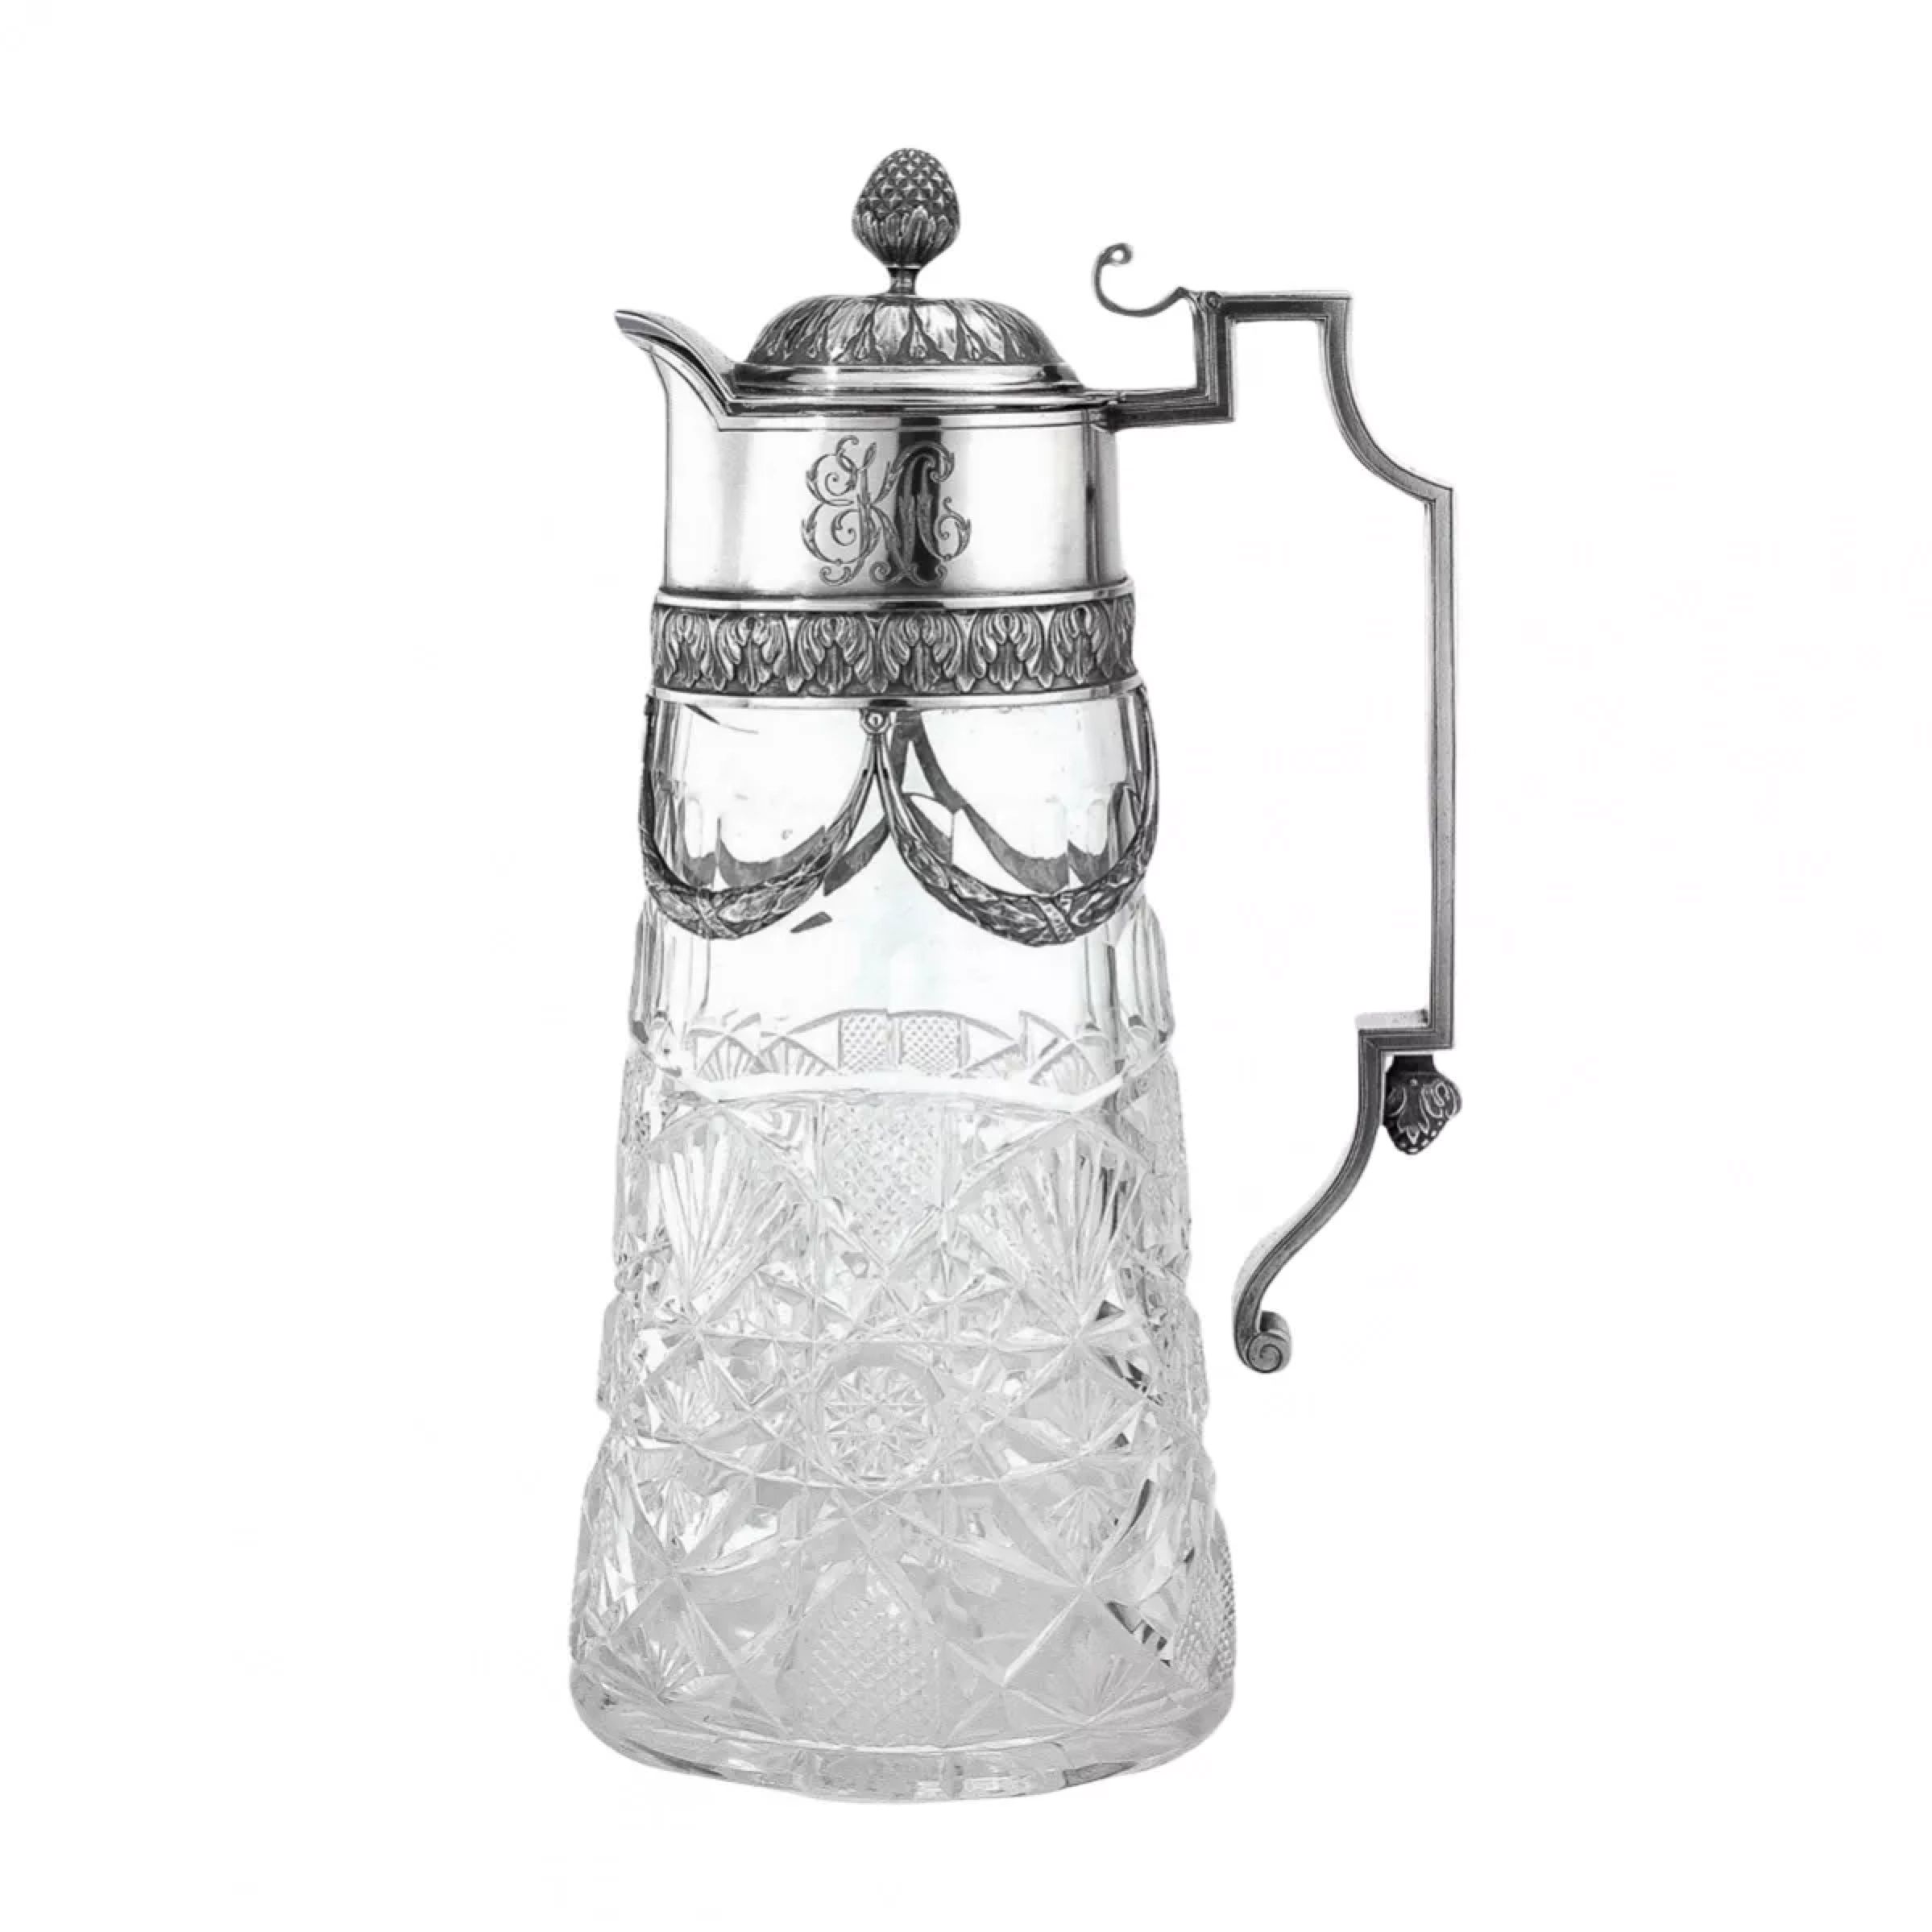 Cut-crystal-jug-with-silver-finial-and-handle-Faberge-